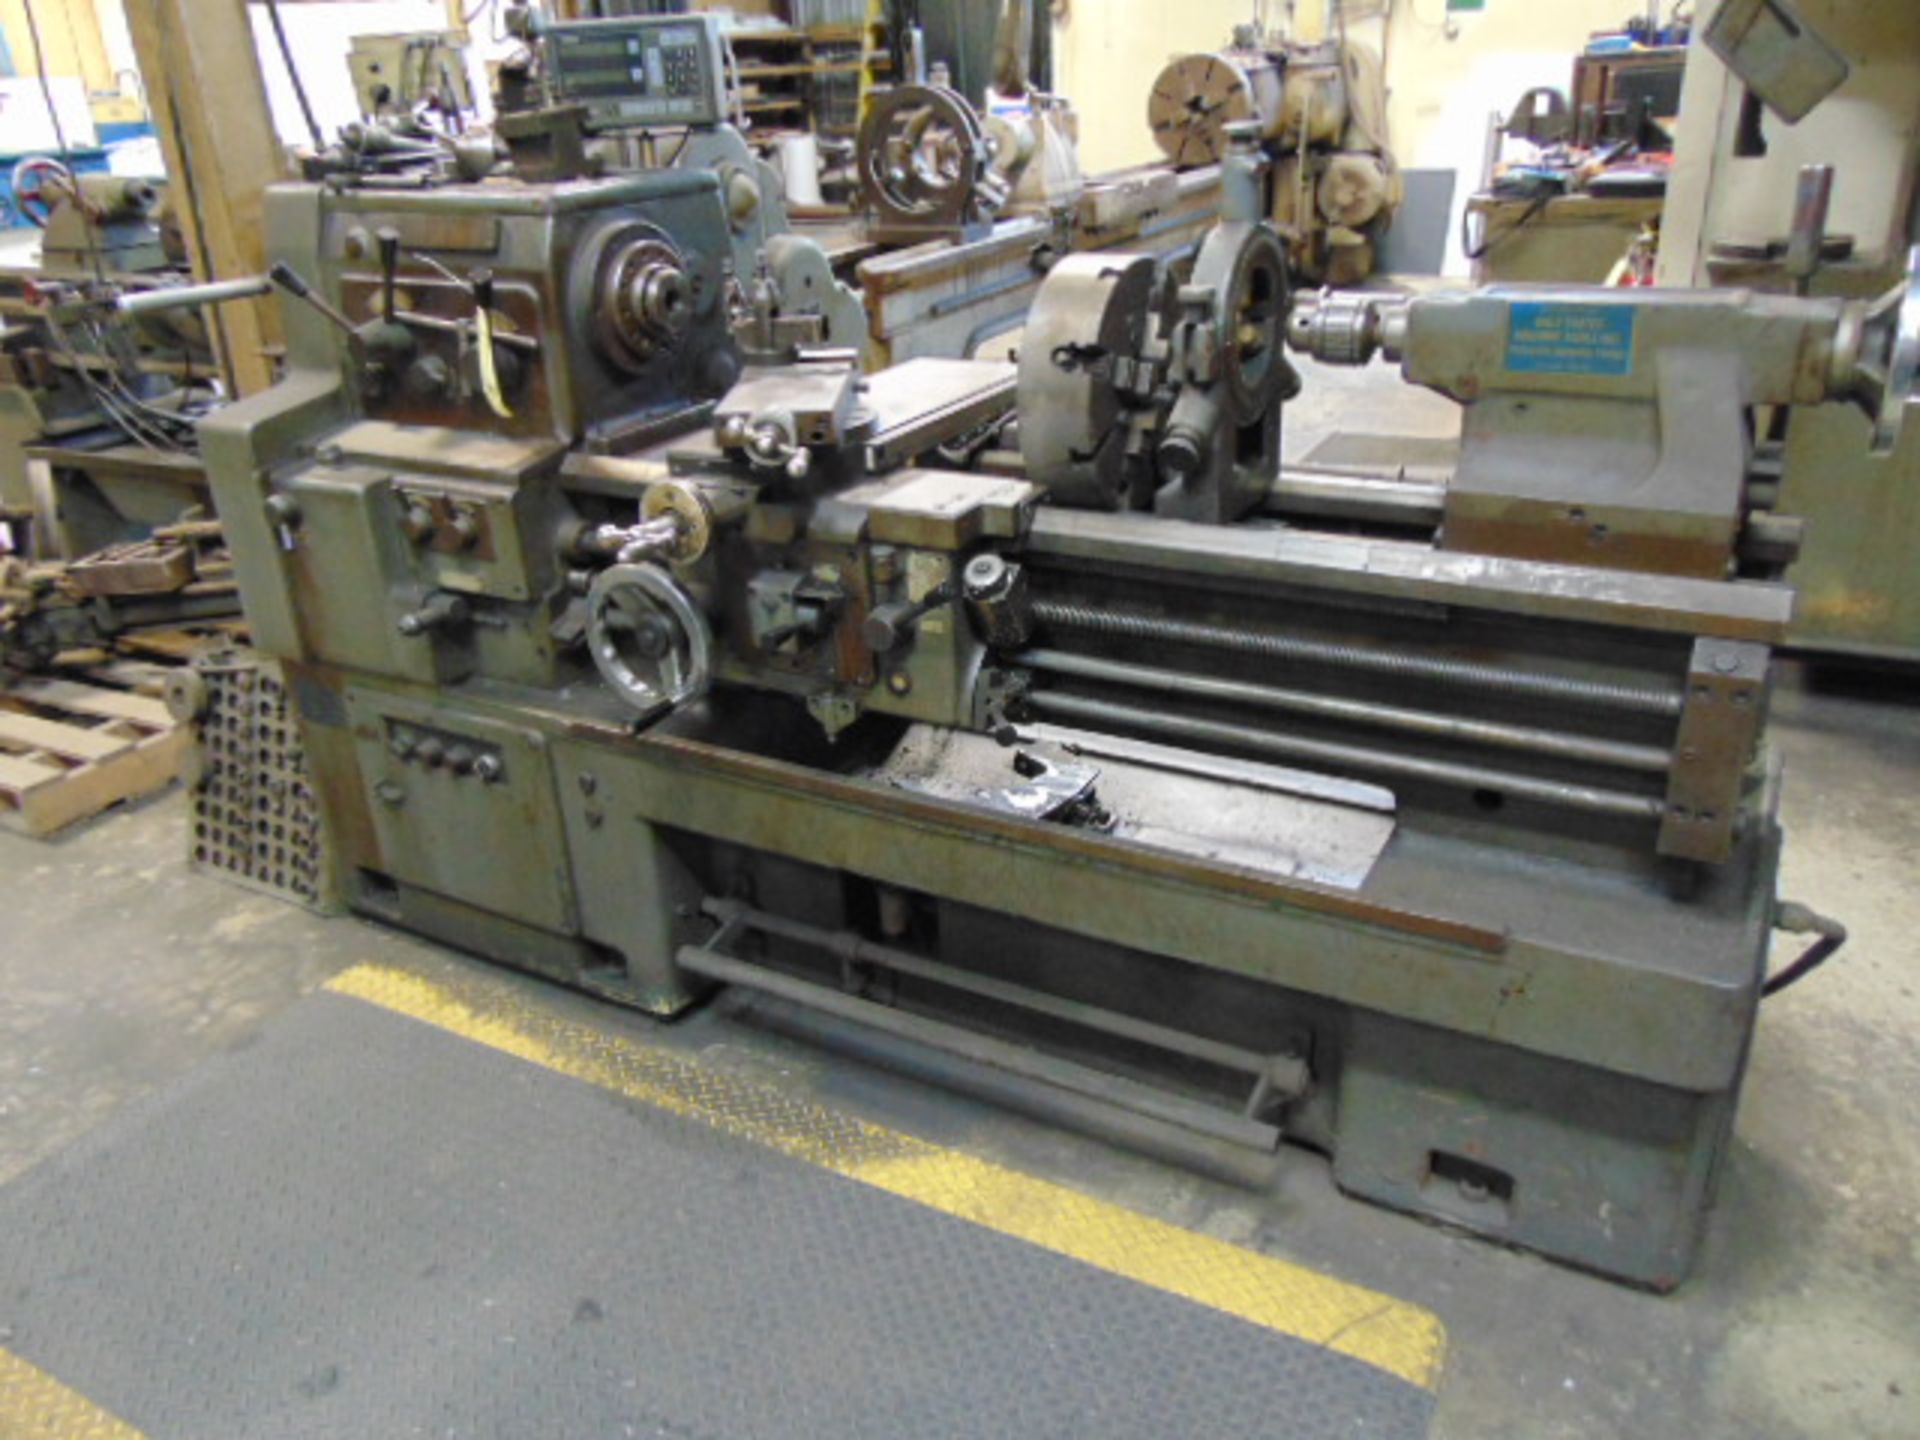 GAP BED ENGINE LATHE, WEBB 17” X 40” MDL. 17GX40, 5 HP motor, taper attach., 5 C lever activated